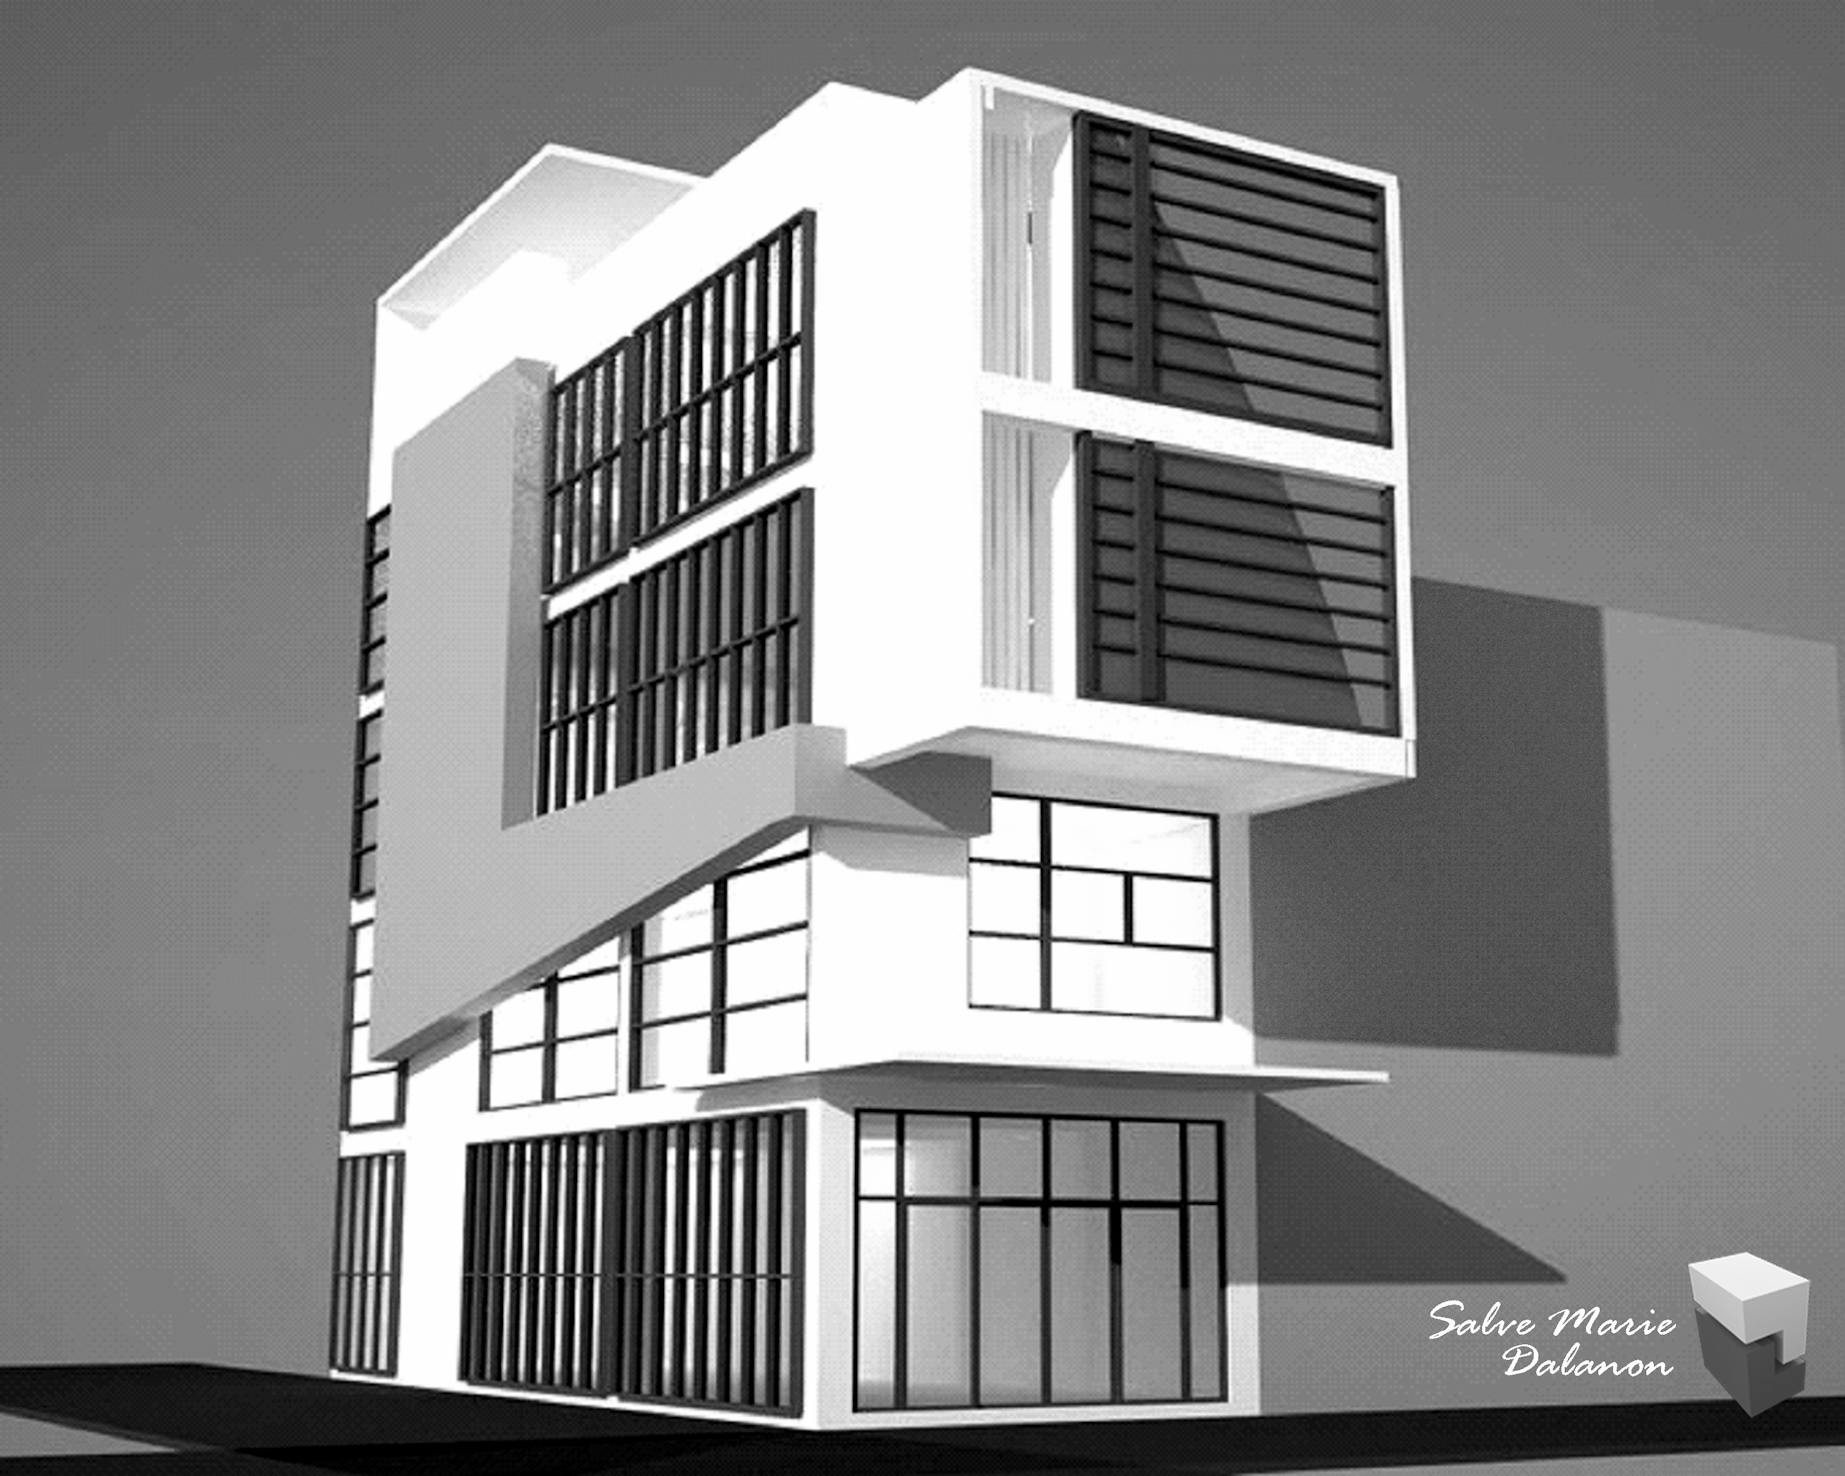 A 4 Storey Commercial Building Salve Marie Dalanon Archinect